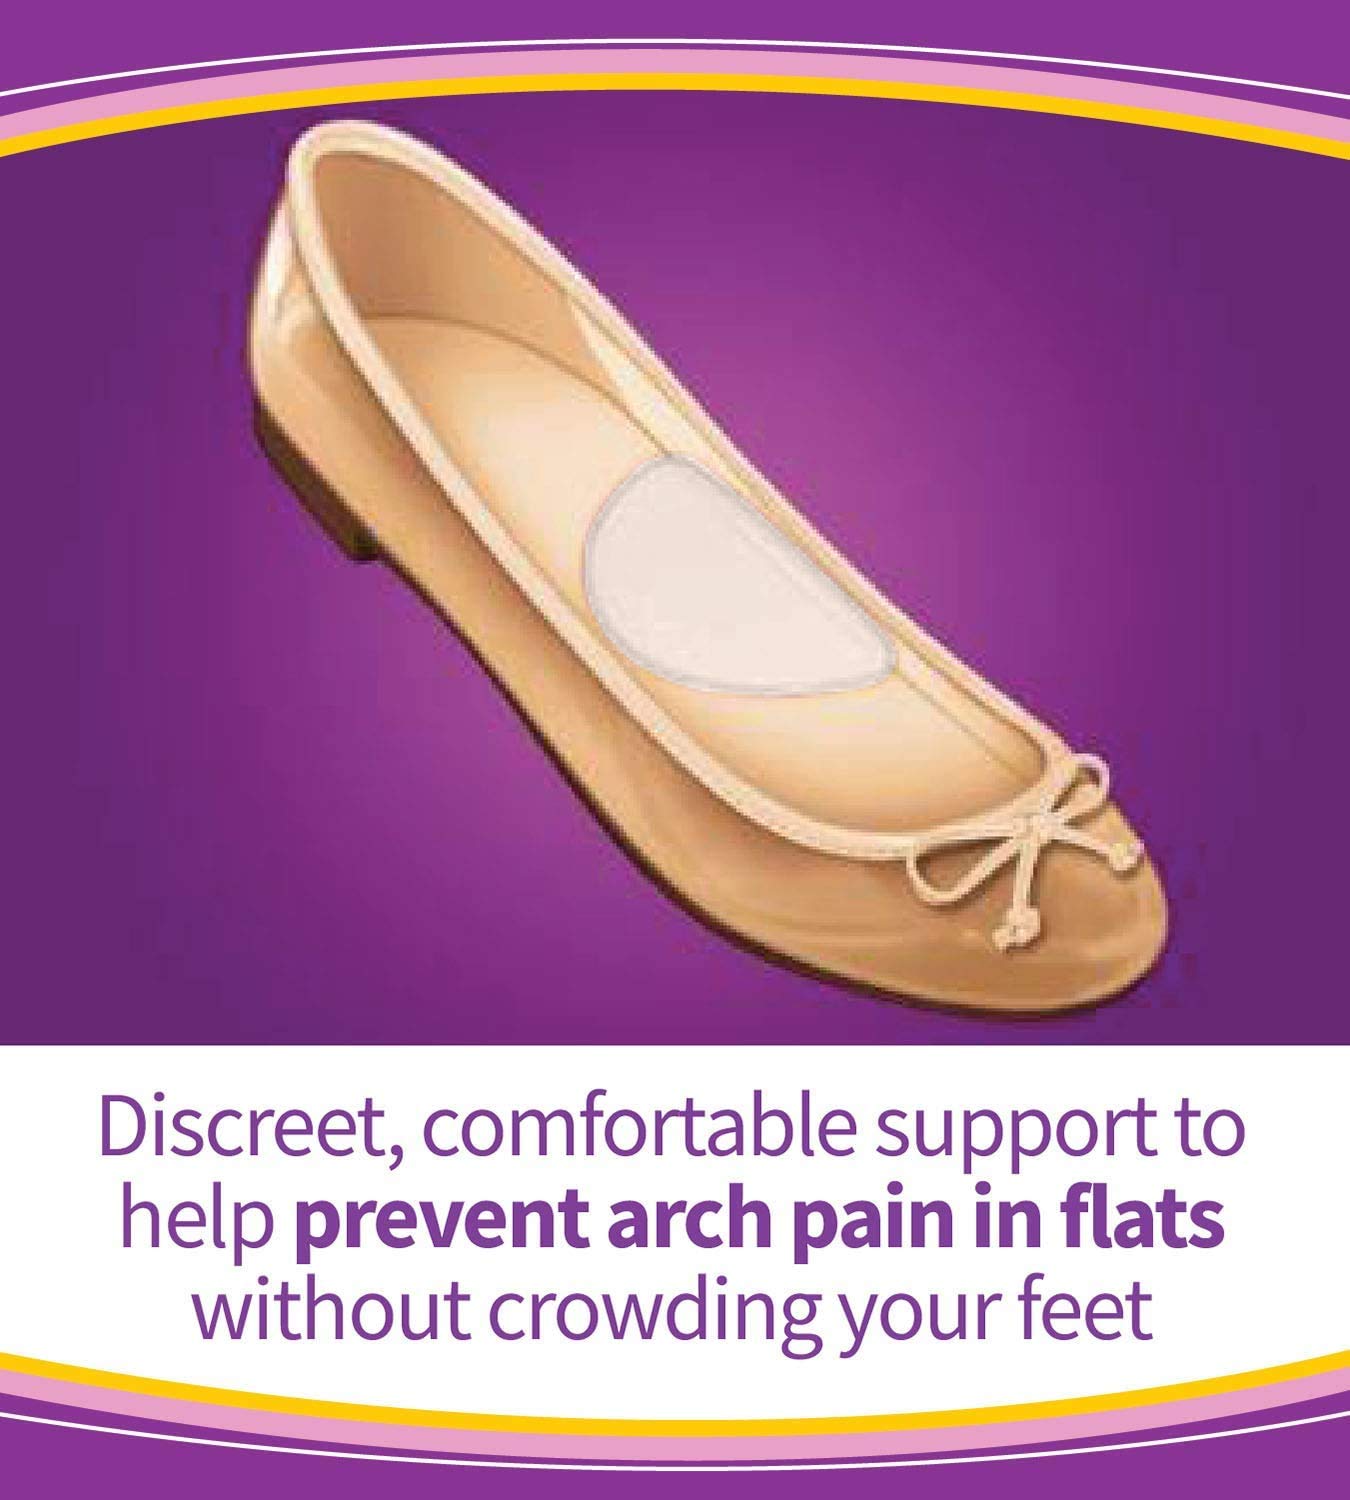 Dr. Scholl’s Stylish Step Hidden Arch Support for Flats, 3 Pairs